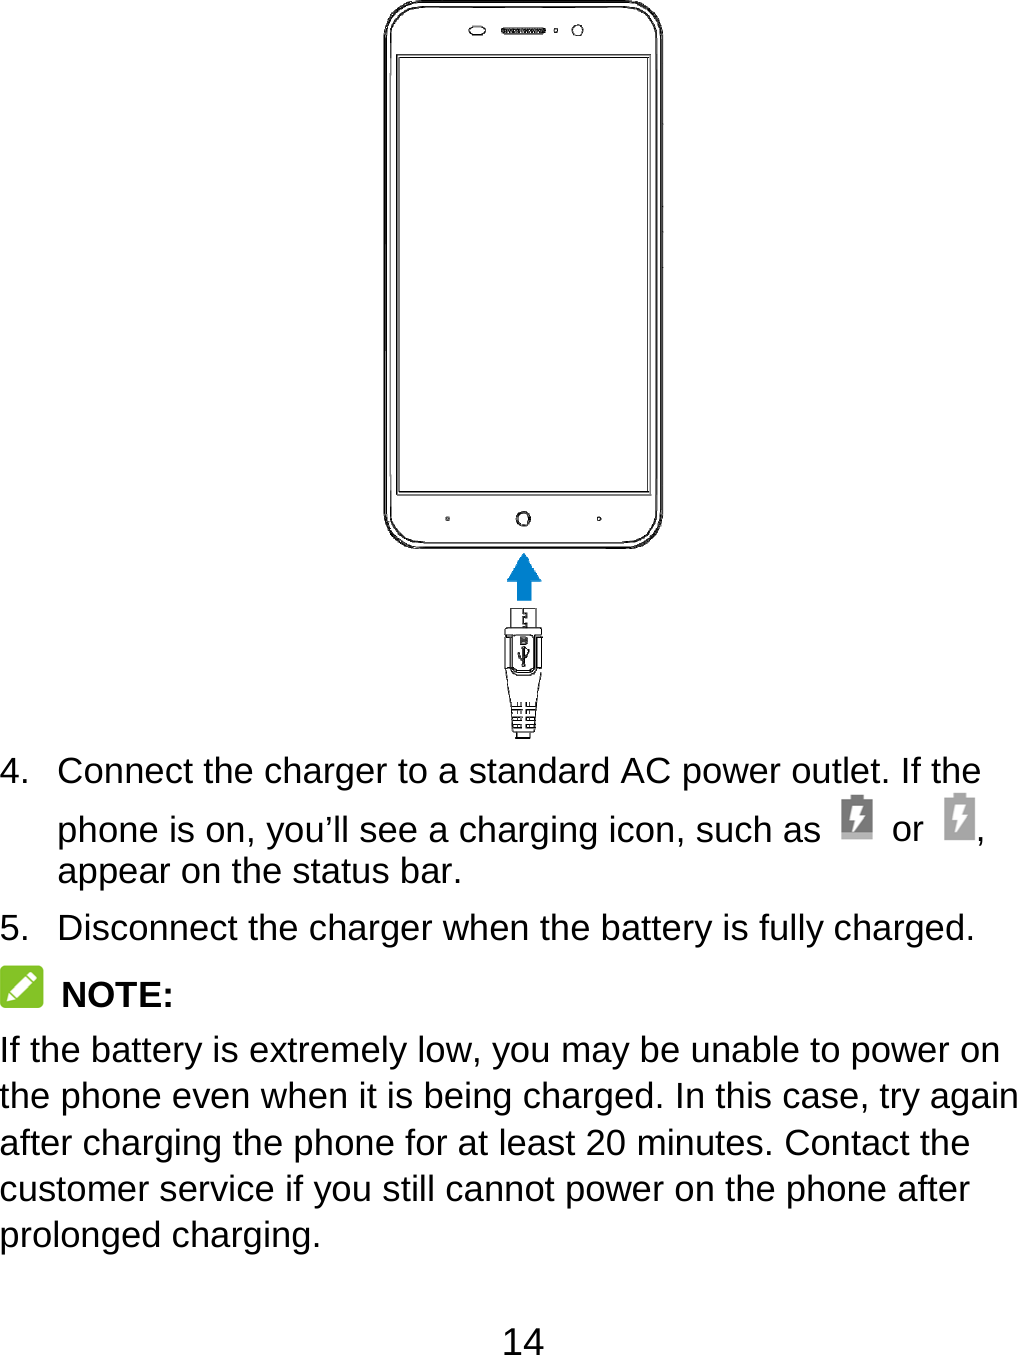 14  4.  Connect the charger to a standard AC power outlet. If the phone is on, you’ll see a charging icon, such as   or  , appear on the status bar. 5.  Disconnect the charger when the battery is fully charged.  NOTE: If the battery is extremely low, you may be unable to power on the phone even when it is being charged. In this case, try again after charging the phone for at least 20 minutes. Contact the customer service if you still cannot power on the phone after prolonged charging. 